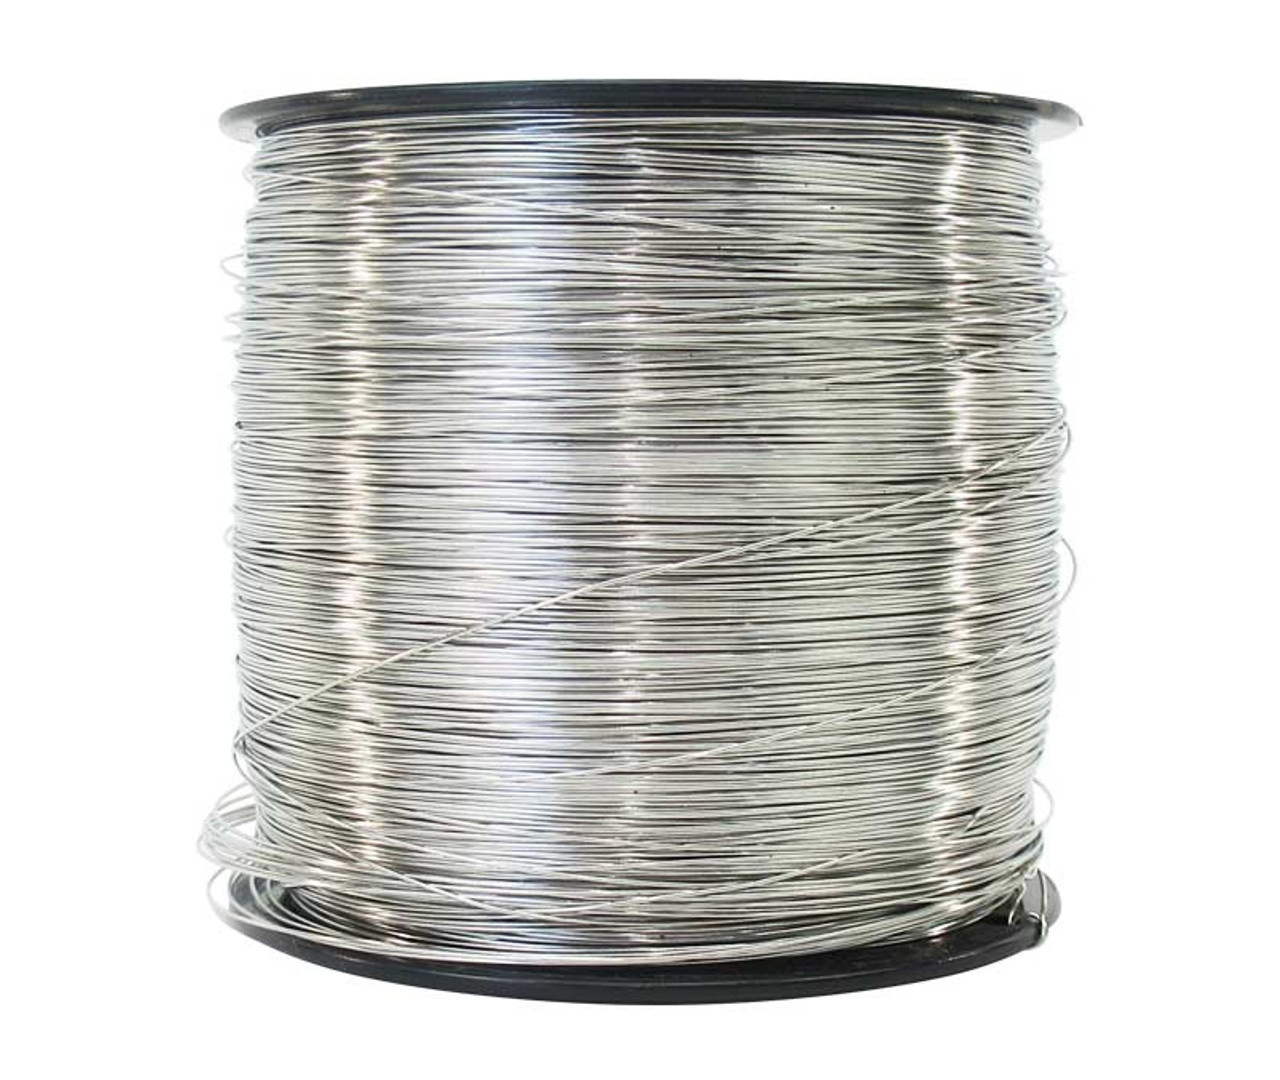 Helix Racing Products 112-0032 Stainless Steel Safety Wire 1/4LB SPOOL 0.032 DIA 